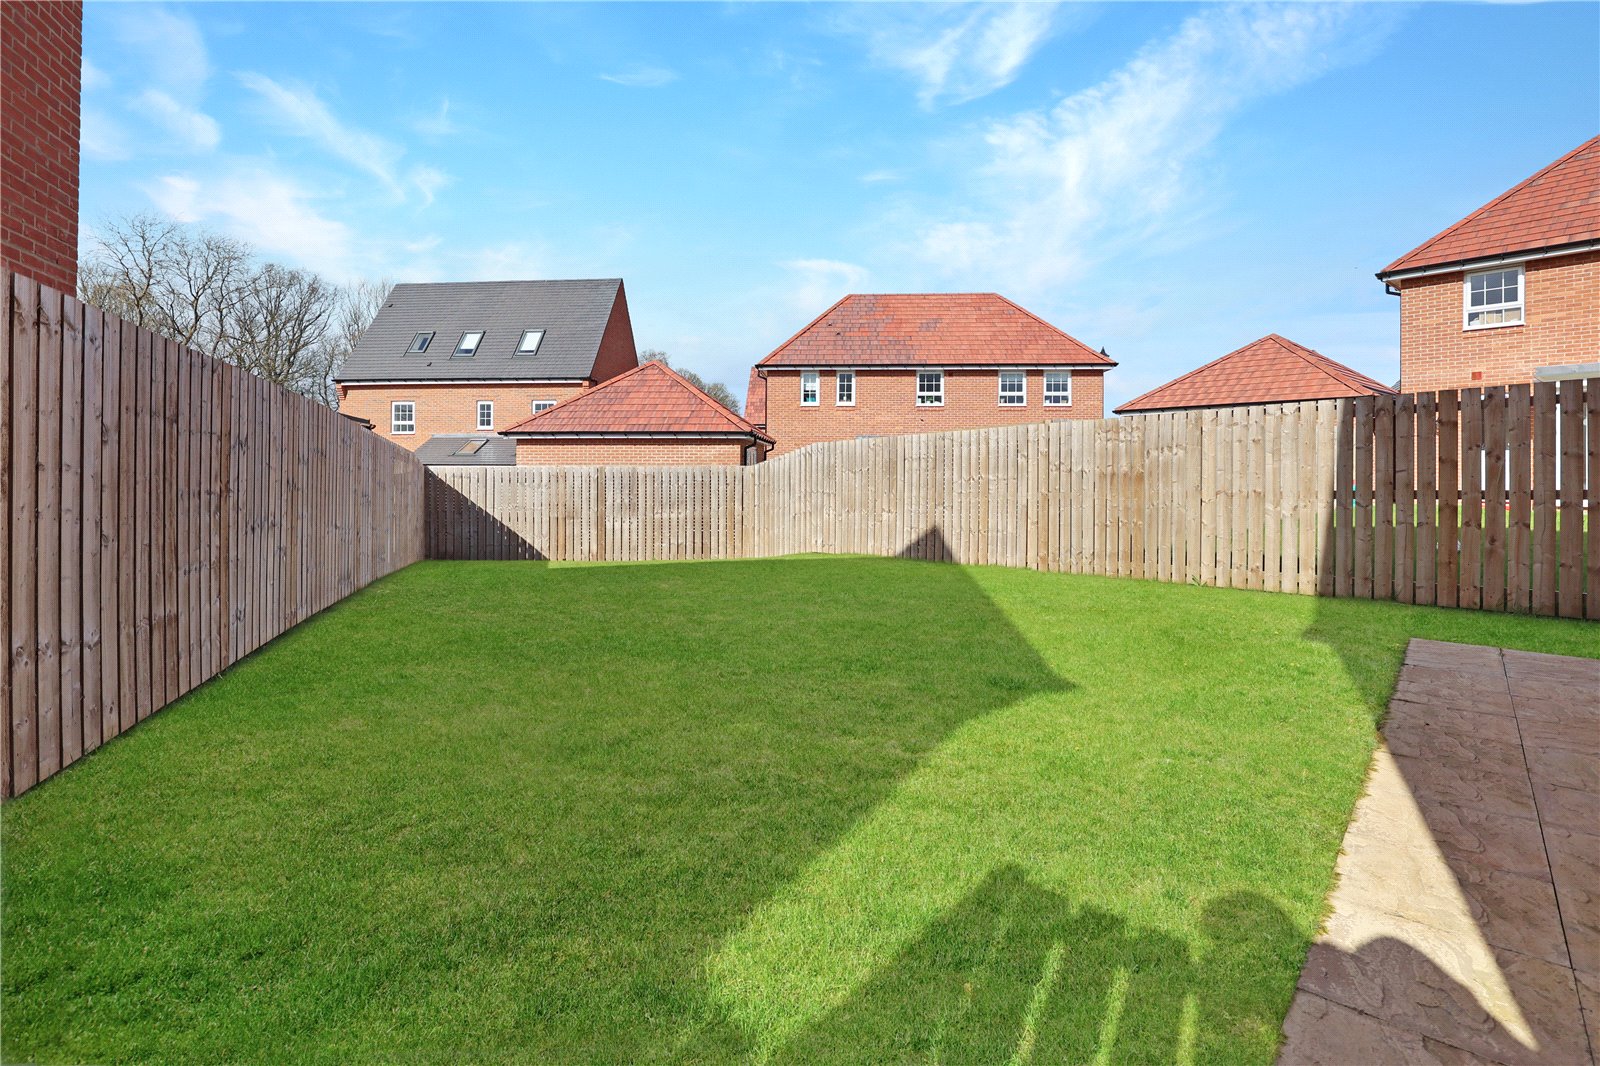 3 bed house for sale in Sinderby Lane, Nunthorpe  - Property Image 2